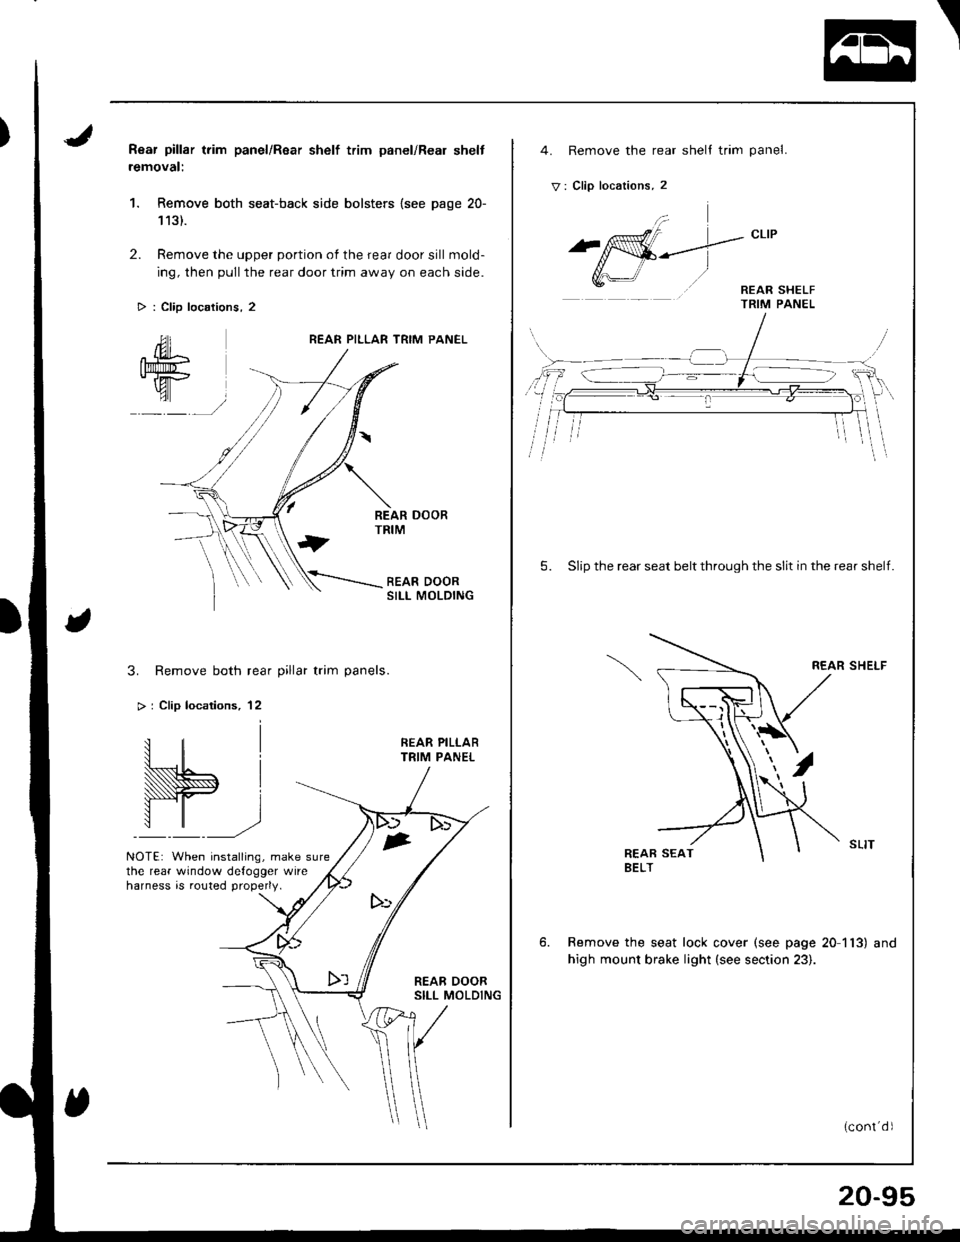 HONDA INTEGRA 1998 4.G Workshop Manual Rear pillar trim panel/Rsar shelf trim panel/Real shelt
removal:
1. Remove both seat-back side bolsters {see page 20-
113).
2. Remove the upper portion of the rear door sill mold-
ing, then pull the r